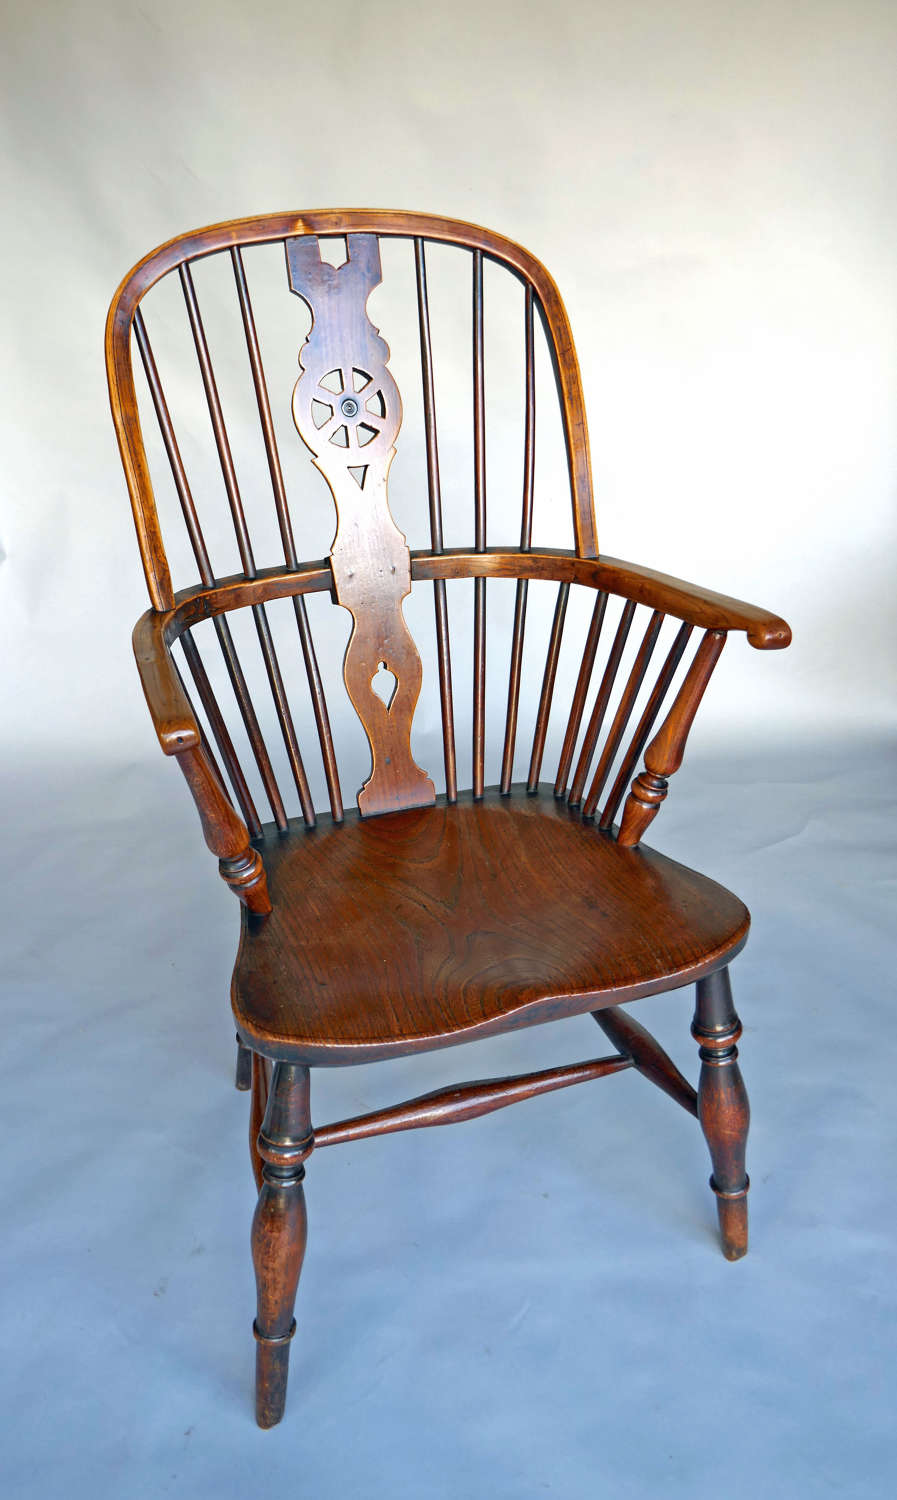 Early Country Furniture 19thc High Hoop Back Windsor Armchair. English